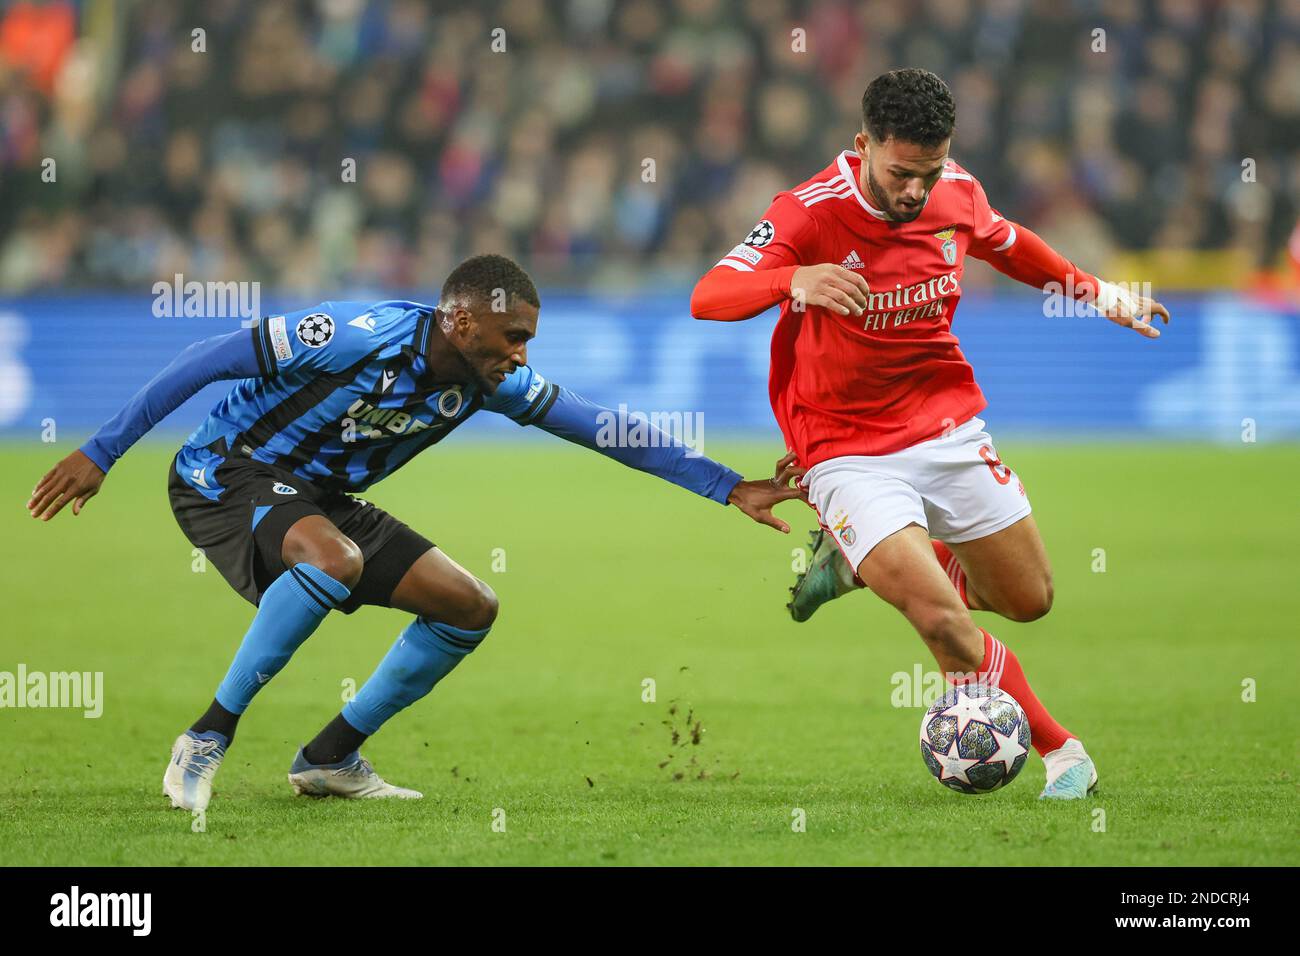 Club's Clinton Mata and Benfica's Goncalo Ramos fight for the ball during a soccer game between Belgian Club Brugge KV and Portuguese Sport Lisboa e Benfica, Wednesday 15 February 2023 in Brugge, the first leg of the round of 16 of the UEFA Champions League competition. BELGA PHOTO BRUNO FAHY Stock Photo